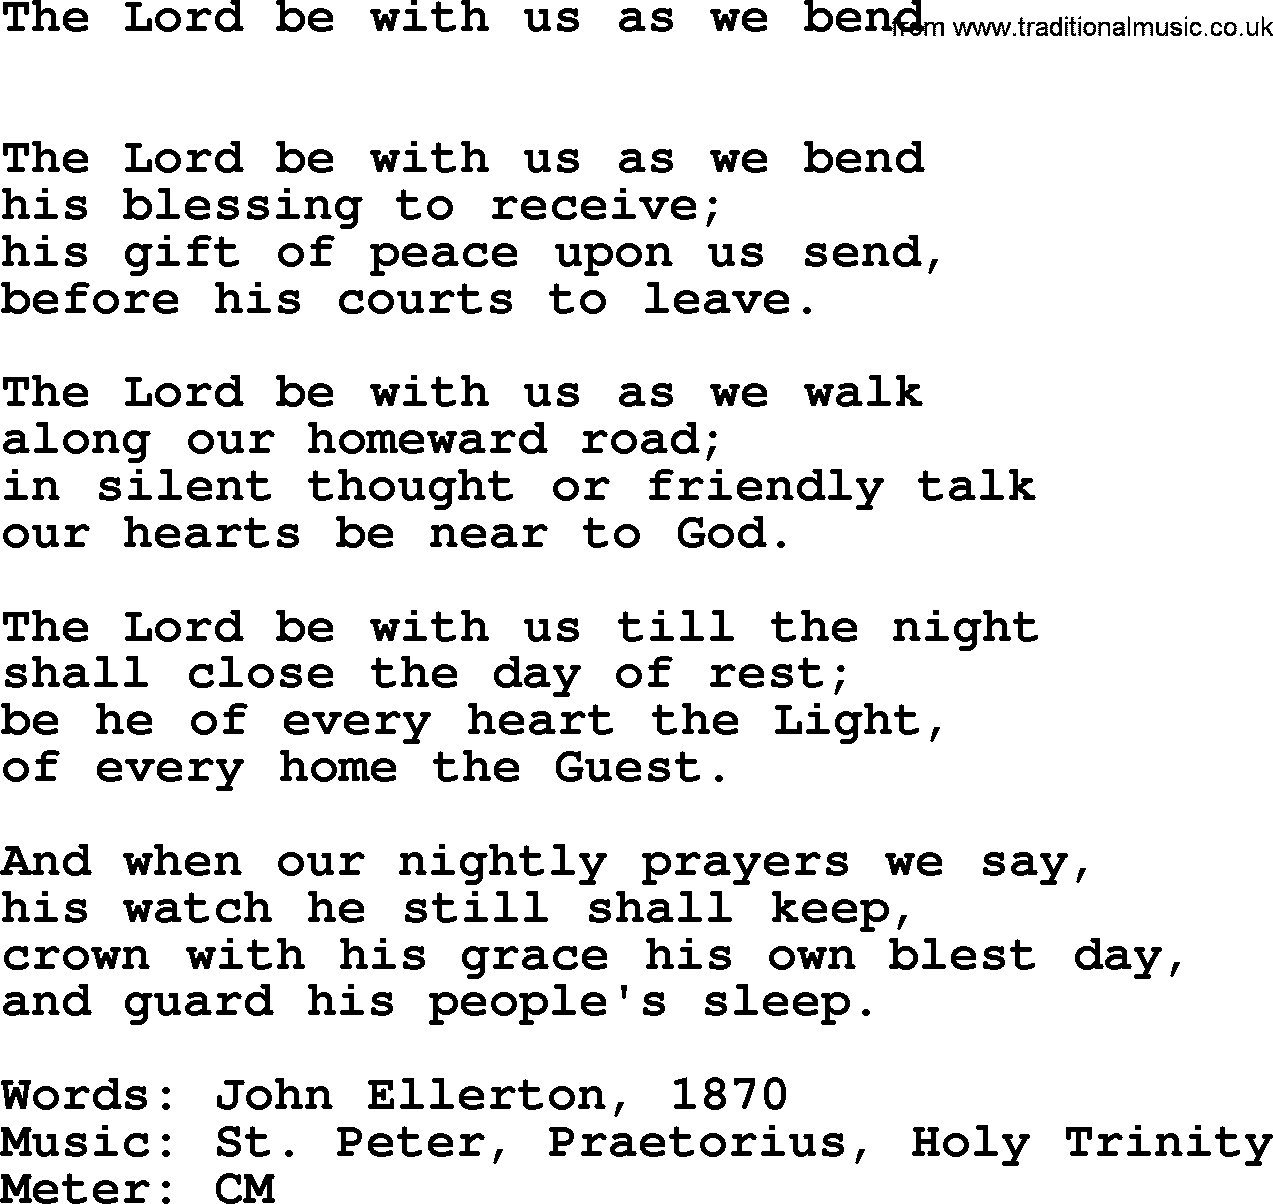 Book of Common Praise Hymn: The Lord Be With Us As We Bend.txt lyrics with midi music